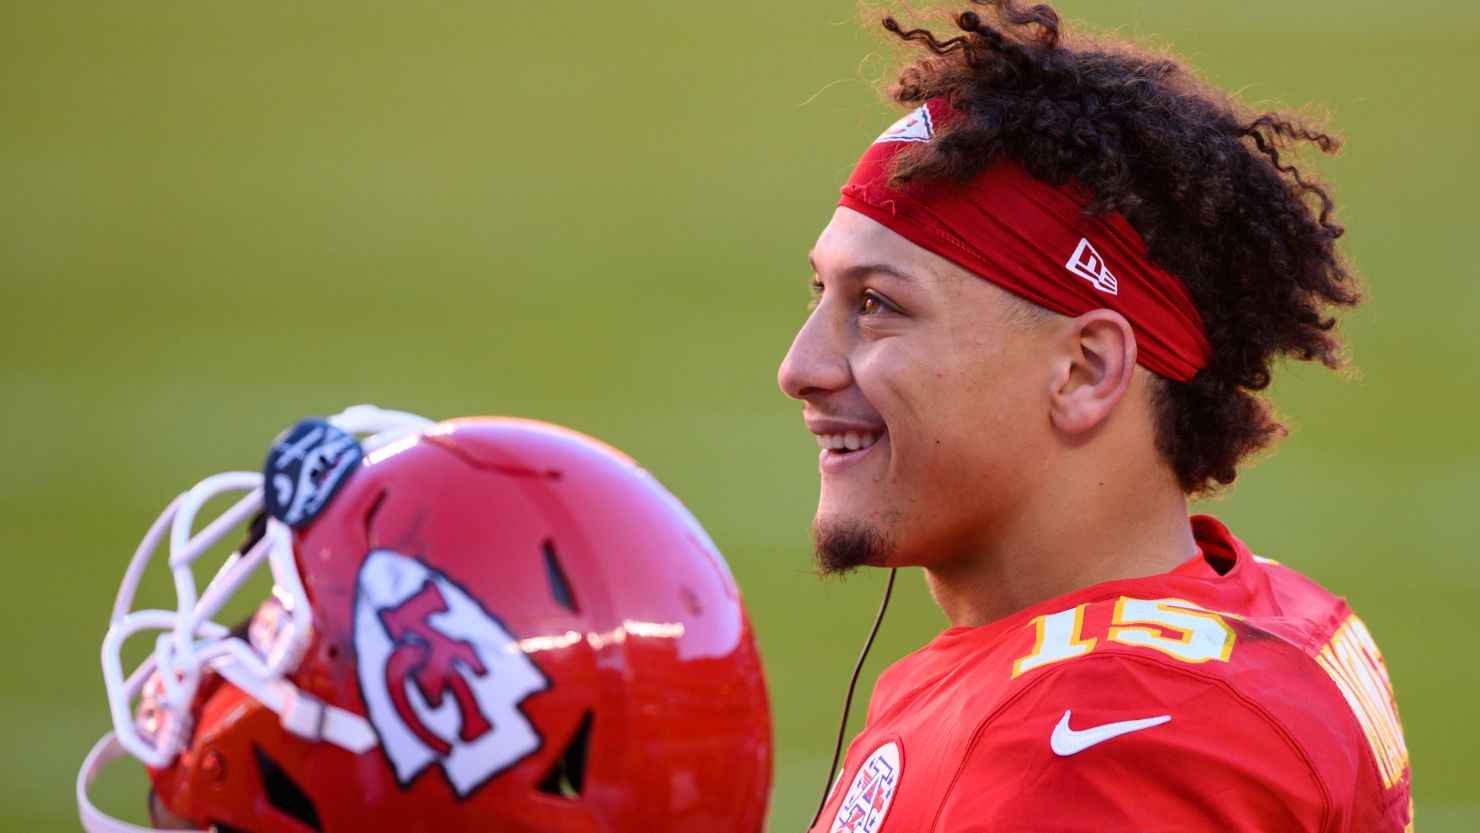 Kansas City Chiefs quarterback Patrick Mahomes says he wanted to use the stadium as a place where people could come together and vote.